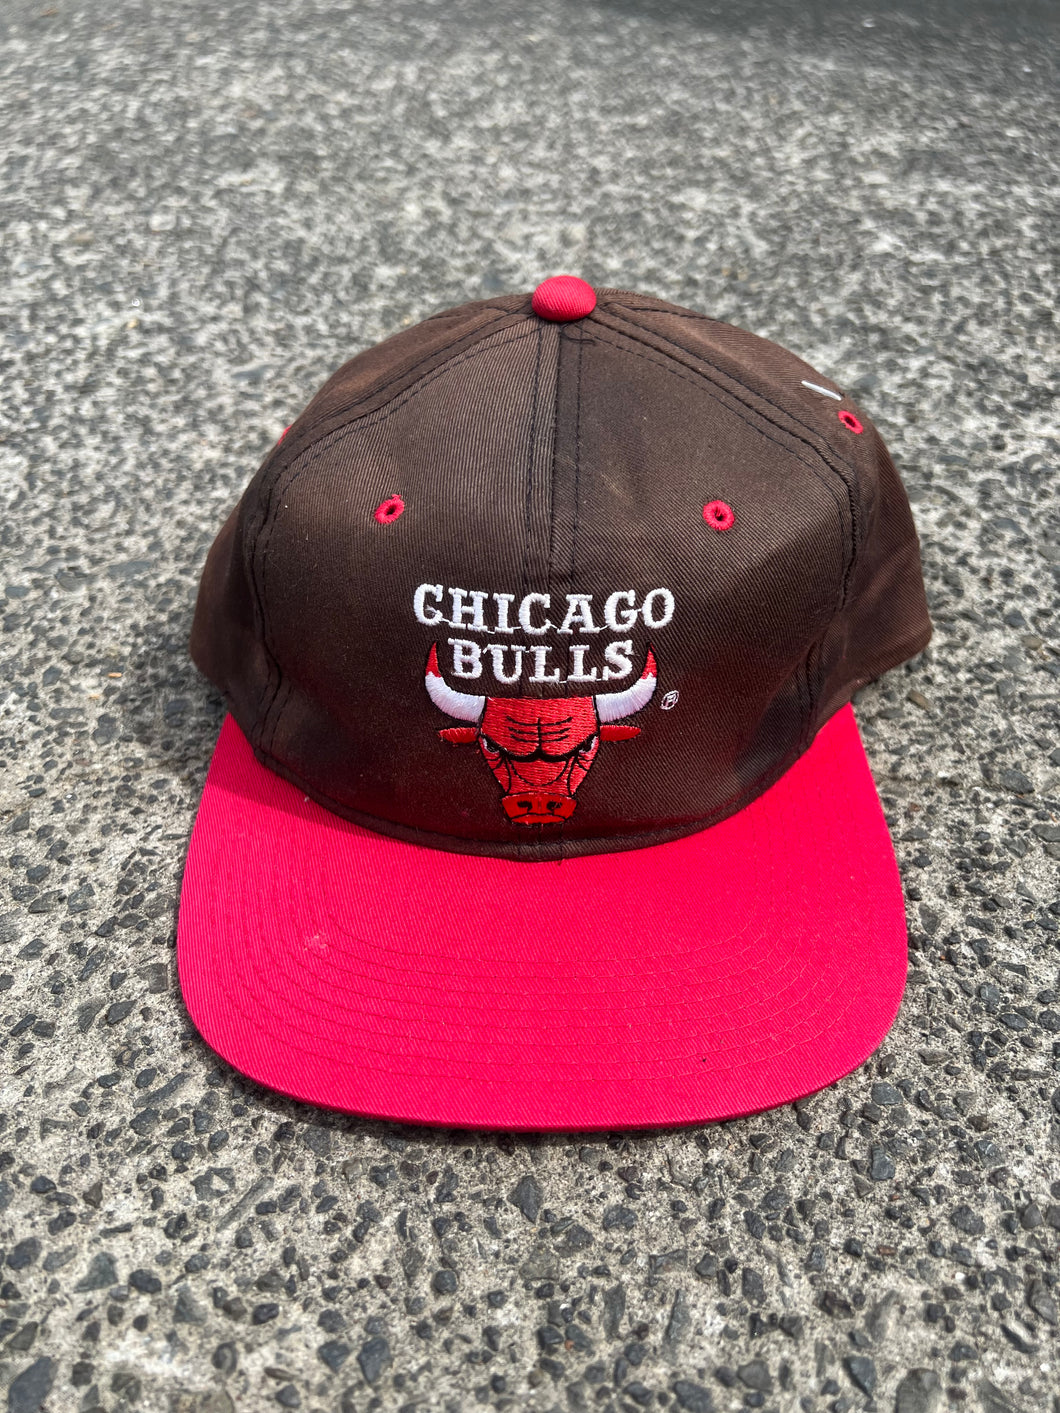 NBA - VINTAGE FADED - CHICAGO BULLS HAT - ONE SIZE FITS ALL OSFA